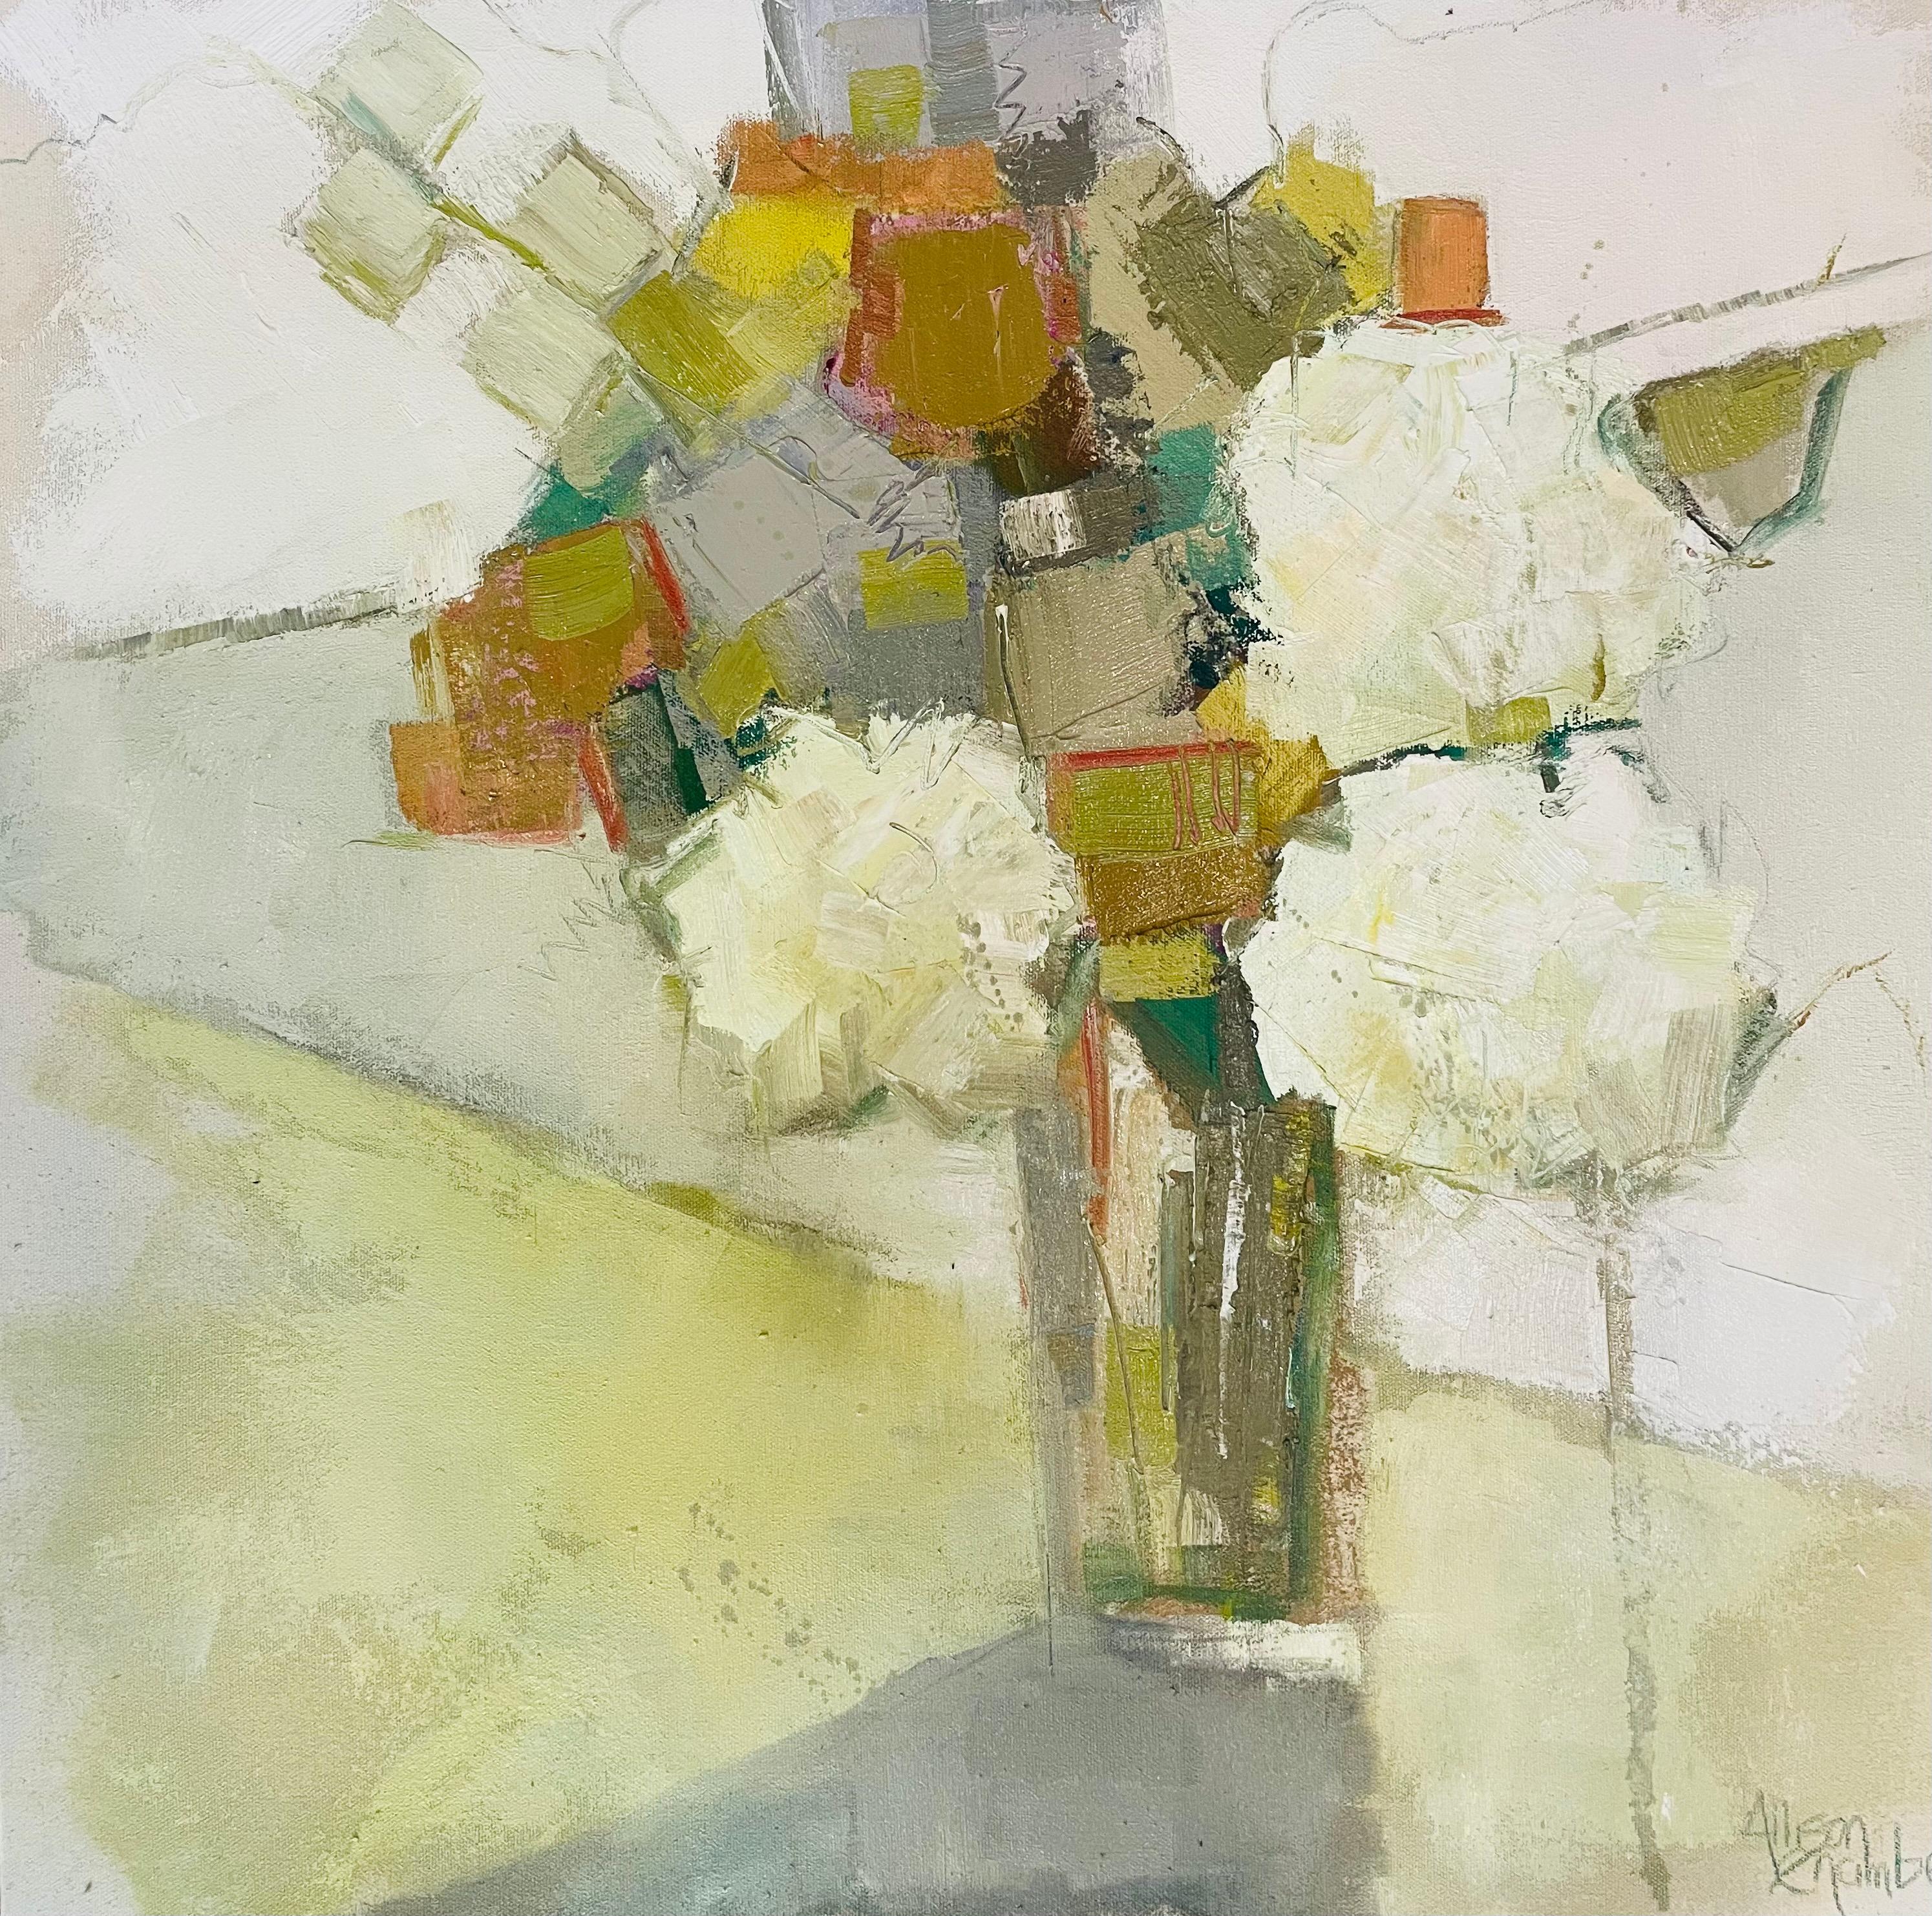 'Wild Thing' is an oil on canvas Impressionist floral painting of square format created by American artist Allison Chambers in 2021. Featuring a palette made of white, green, gold, grey and beige tones, the painting depicts an exquisite bouquet of